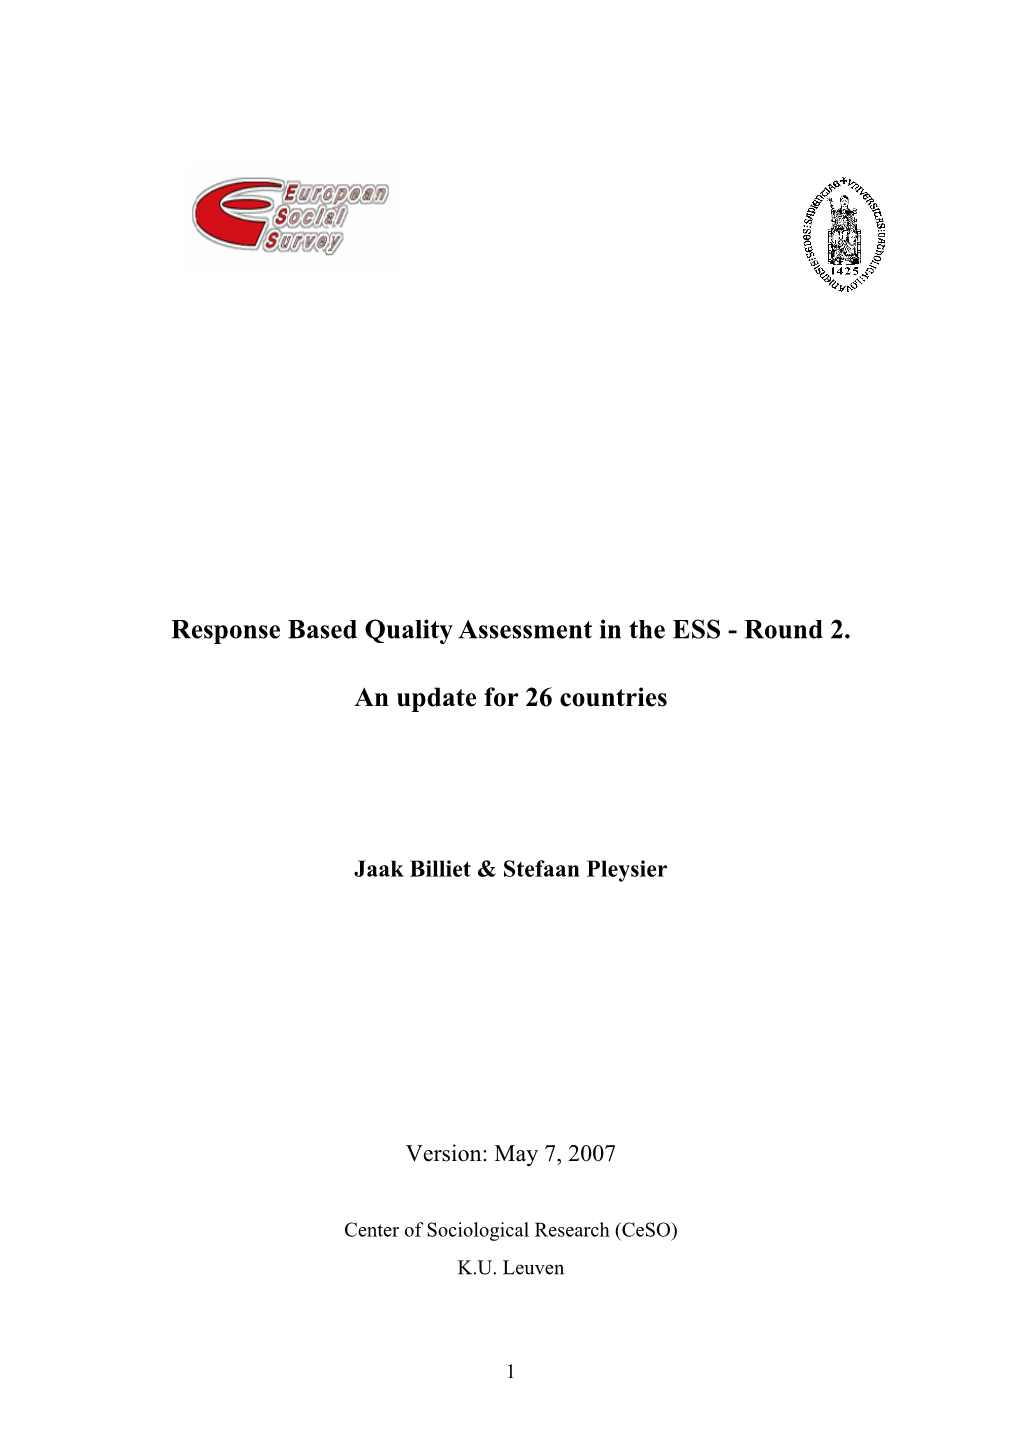 Response Based Quality Assessment in the ESS - Round 2